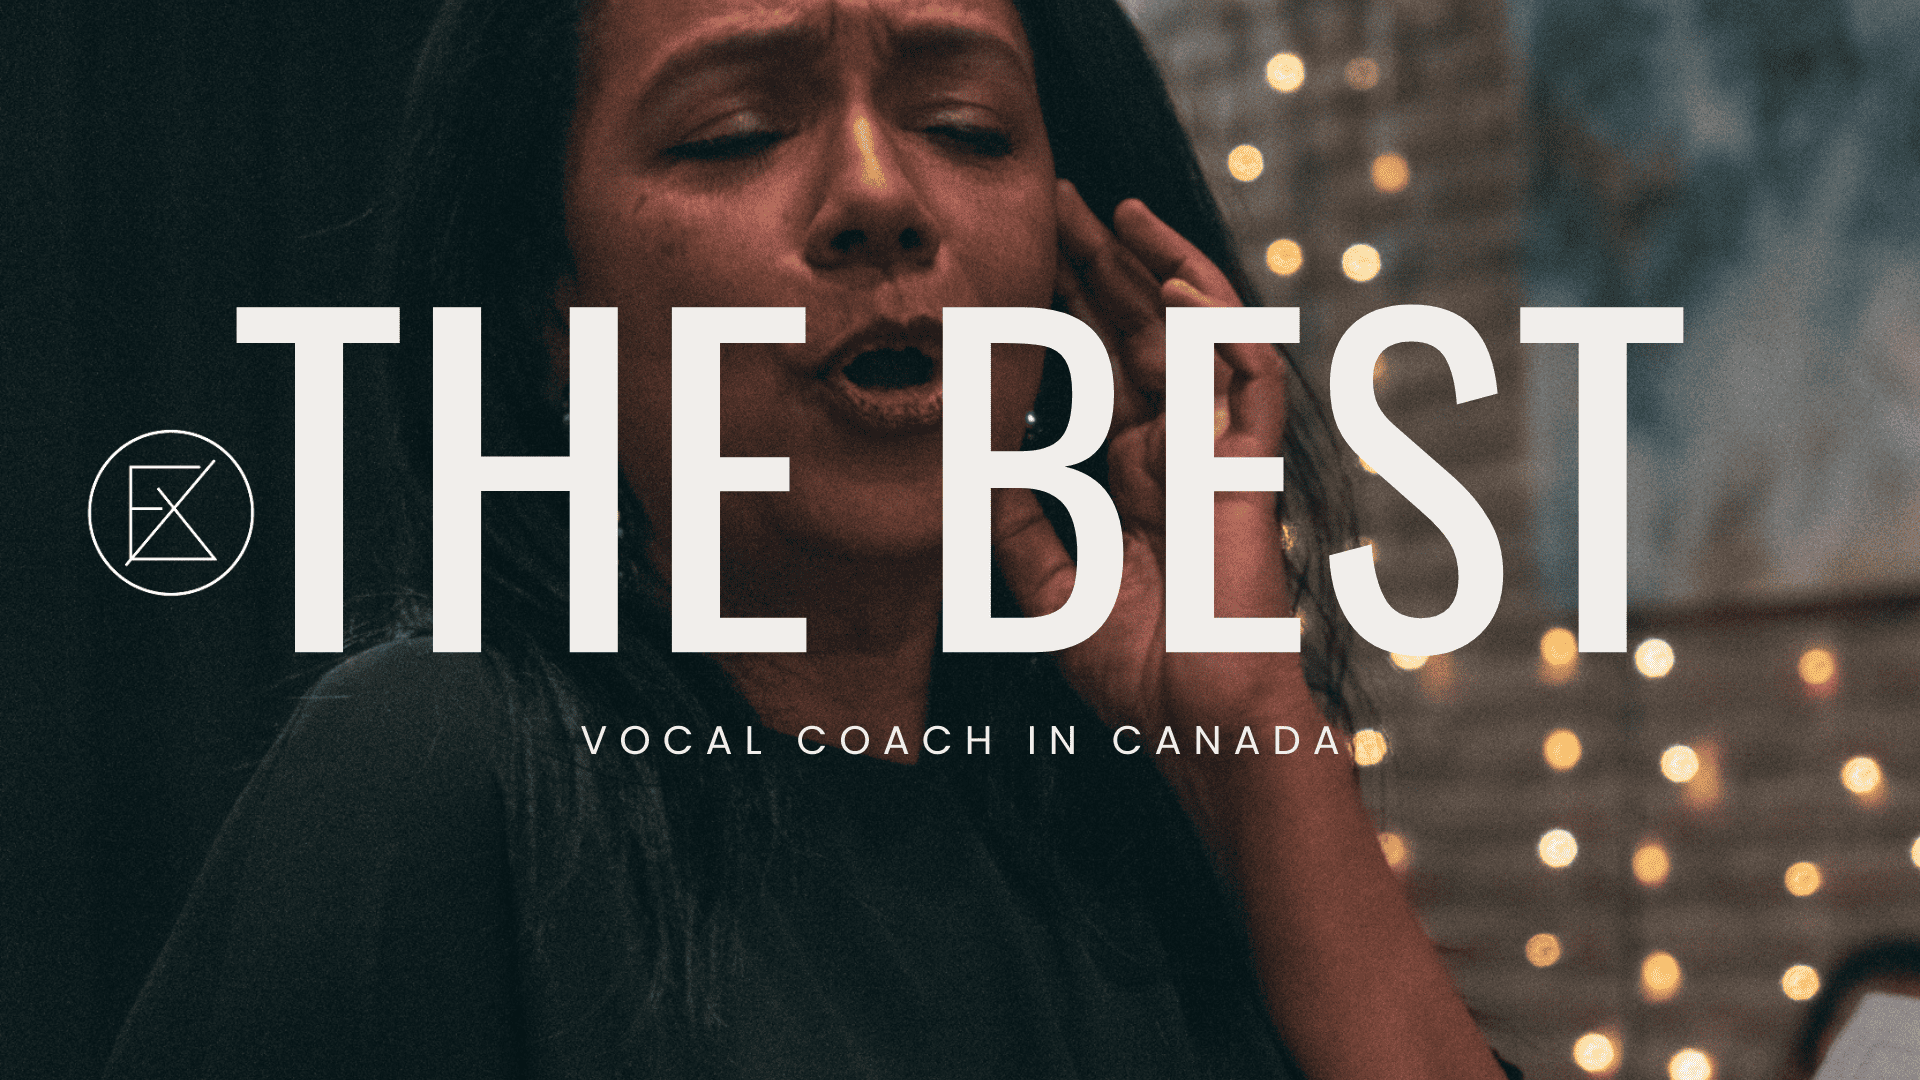 Where to find the best vocal coach in Canada?